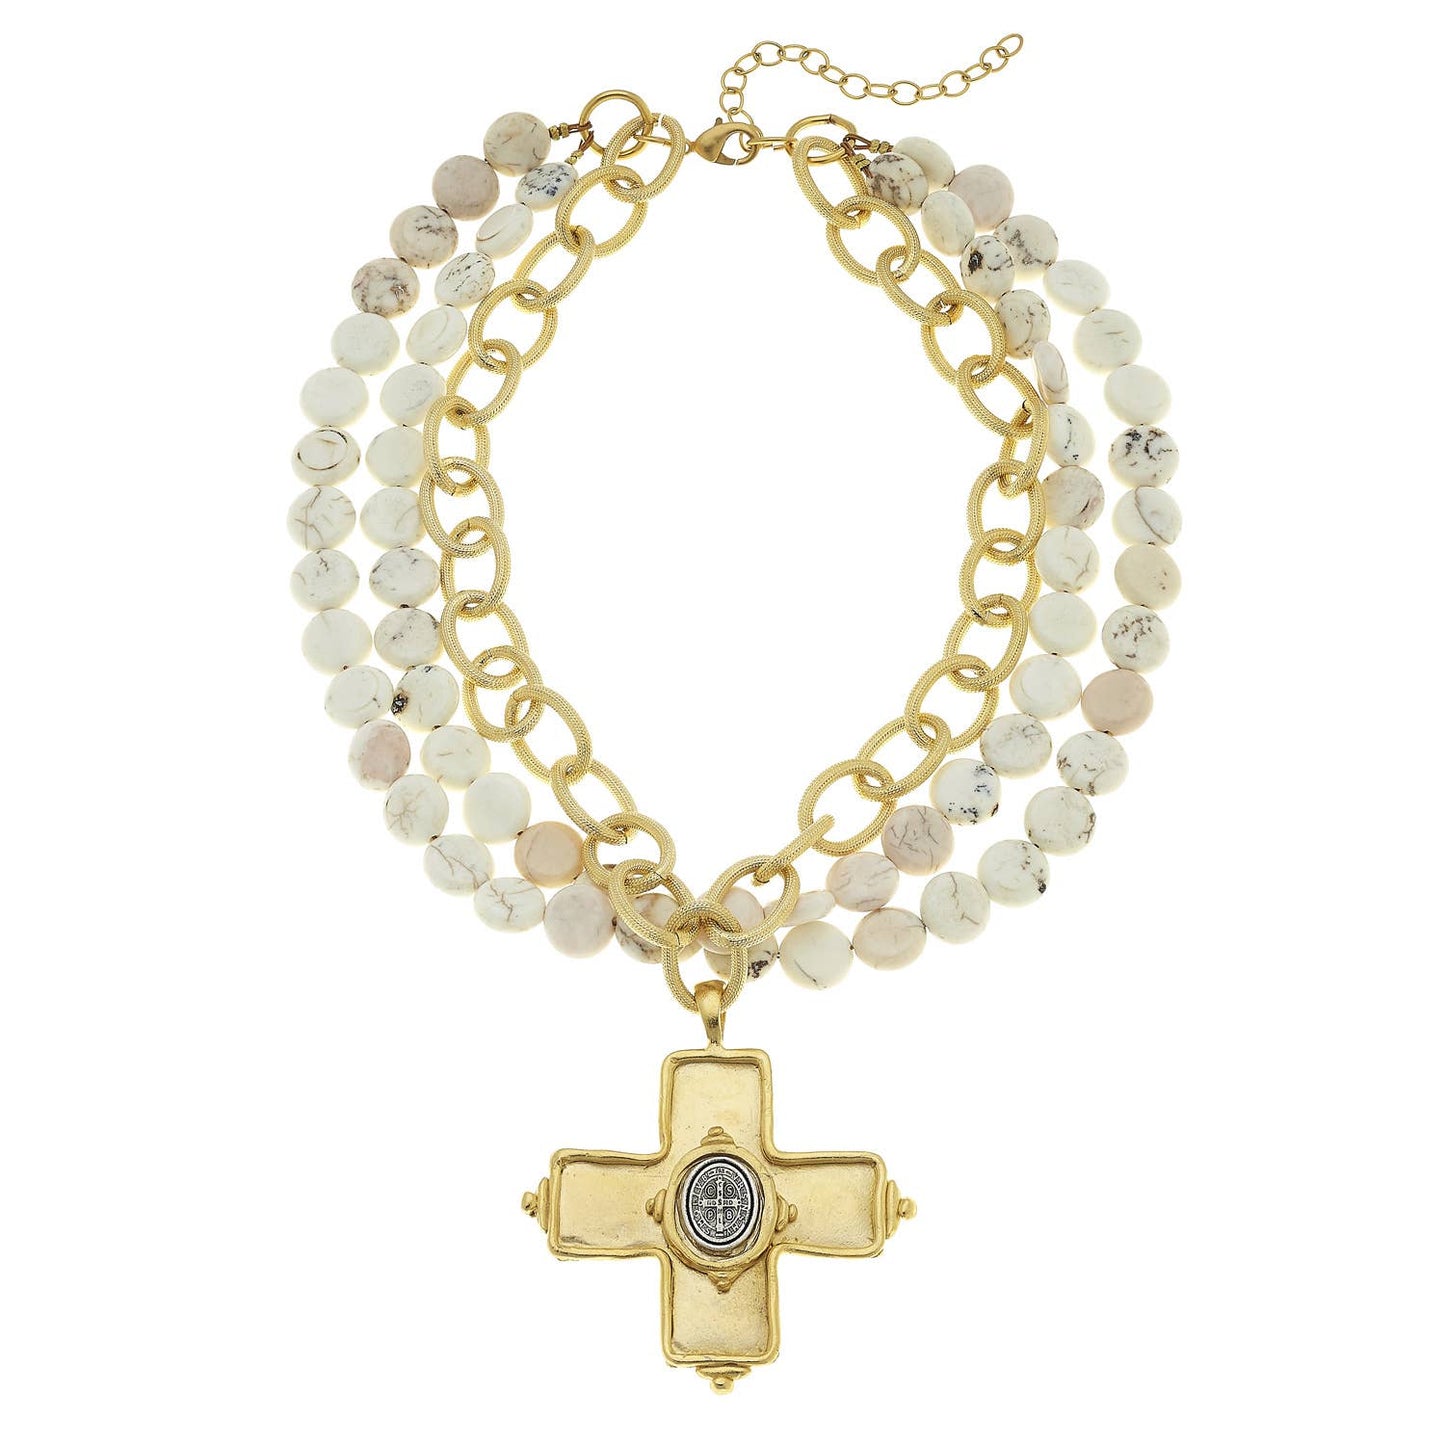 Gold Cross with St Benedict and White Turquoise.